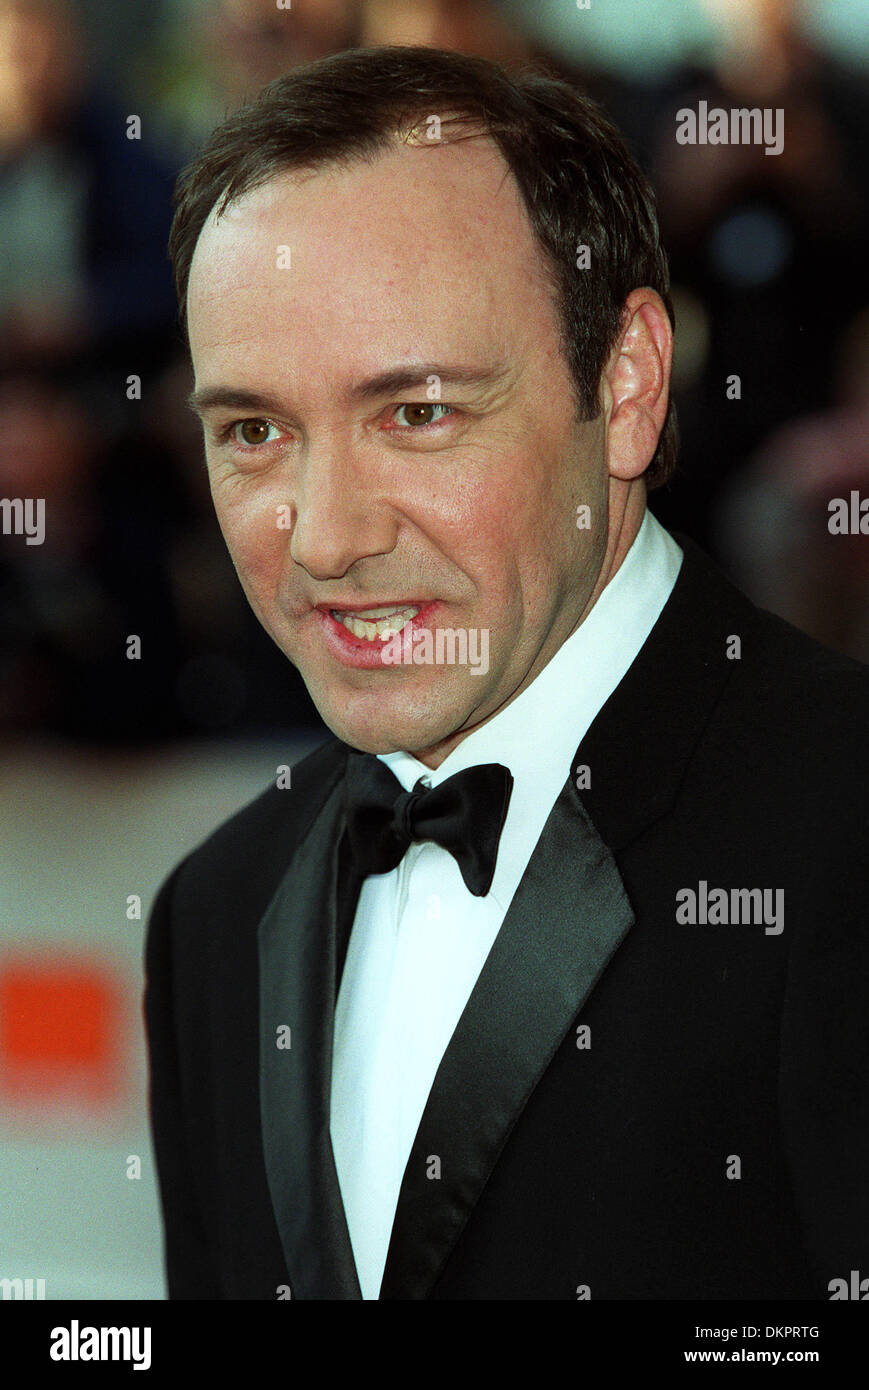 KEVIN SPACEY.ACTOR.09/04/2000.Y71D35C. Stock Photo